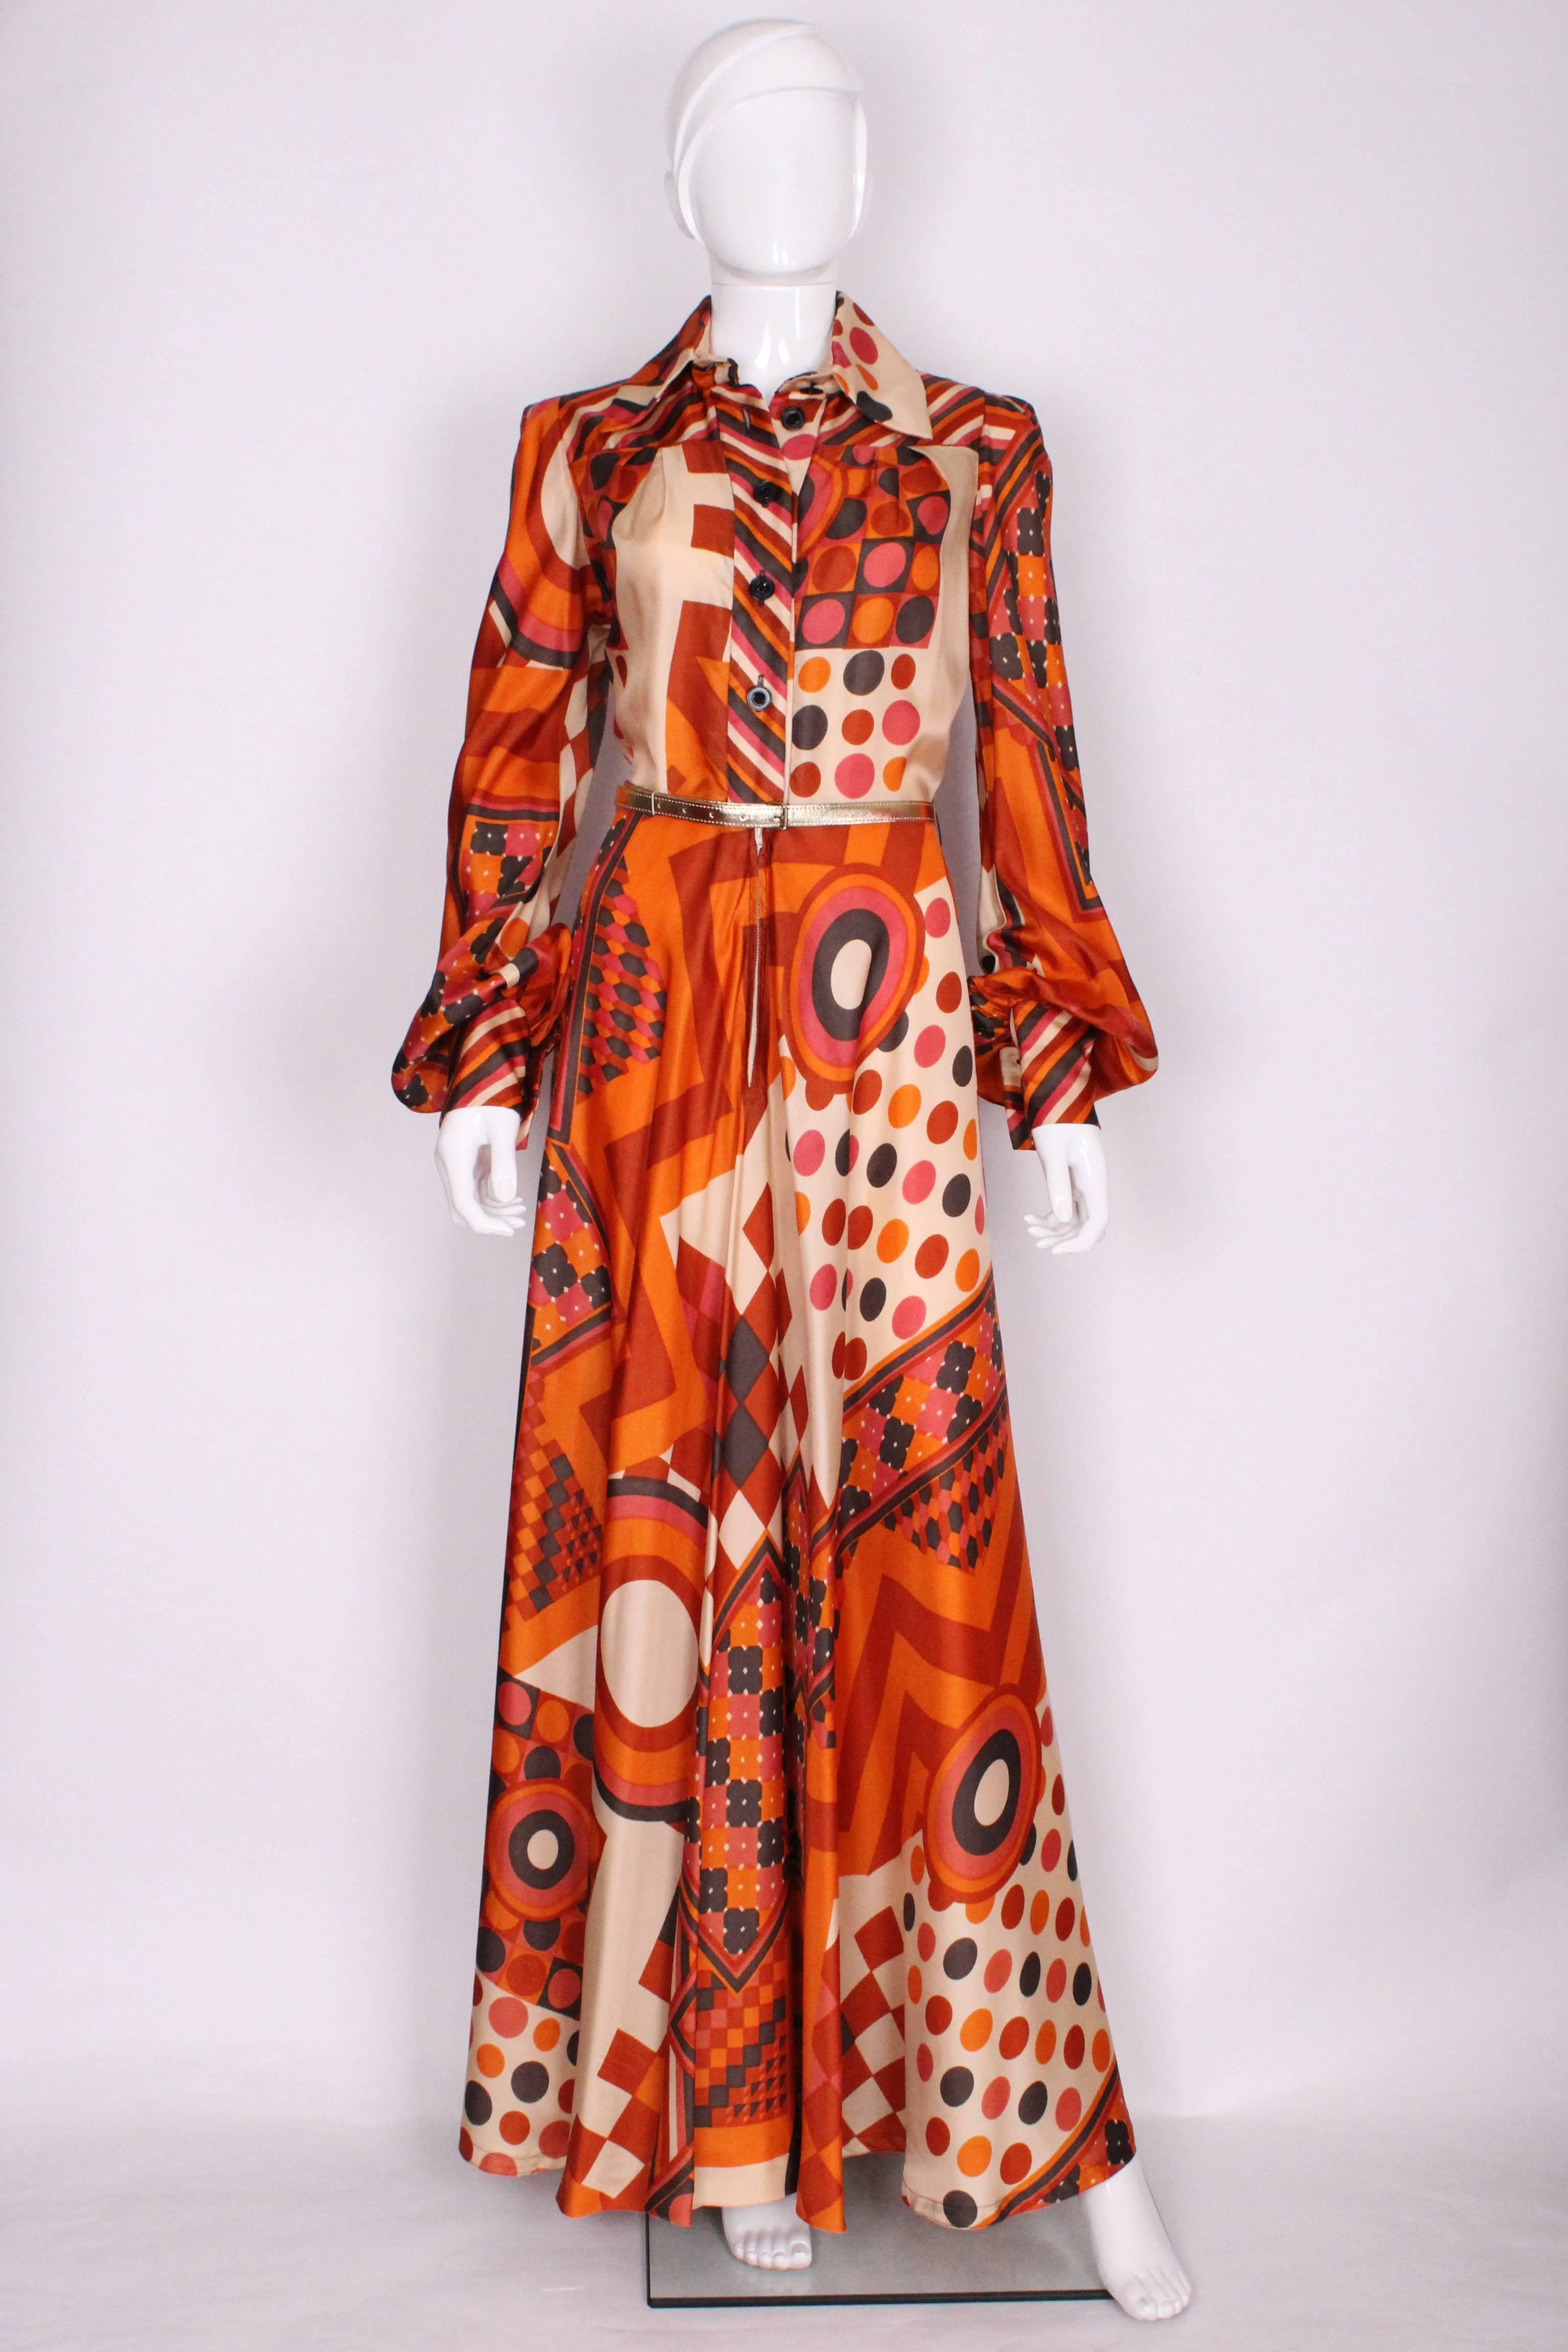 A wonderful gown for Fall by British designer Jean Varon ( John Bates).. In wonderful shades of pumpkin, burnt orange,black and ivory and a groovy and geometric print.This gown has a   large collar, 5 button opening down to the waist and a zip from